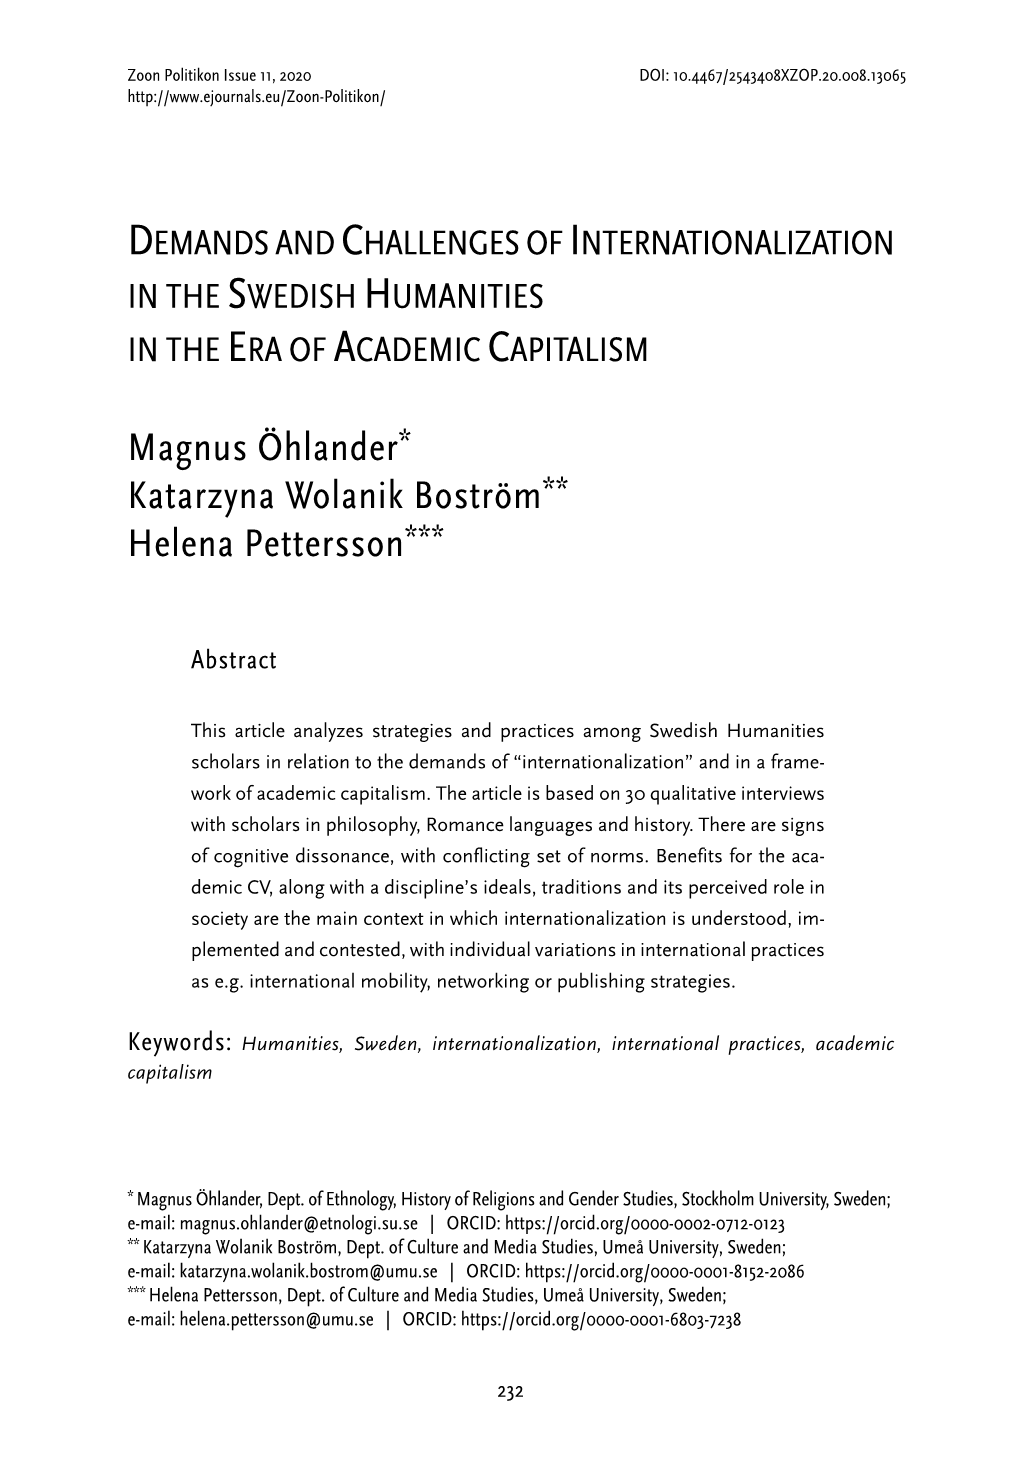 Demands and Challenges of Internationalization in the Swedish Humanities in the Era of Academic Capitalism